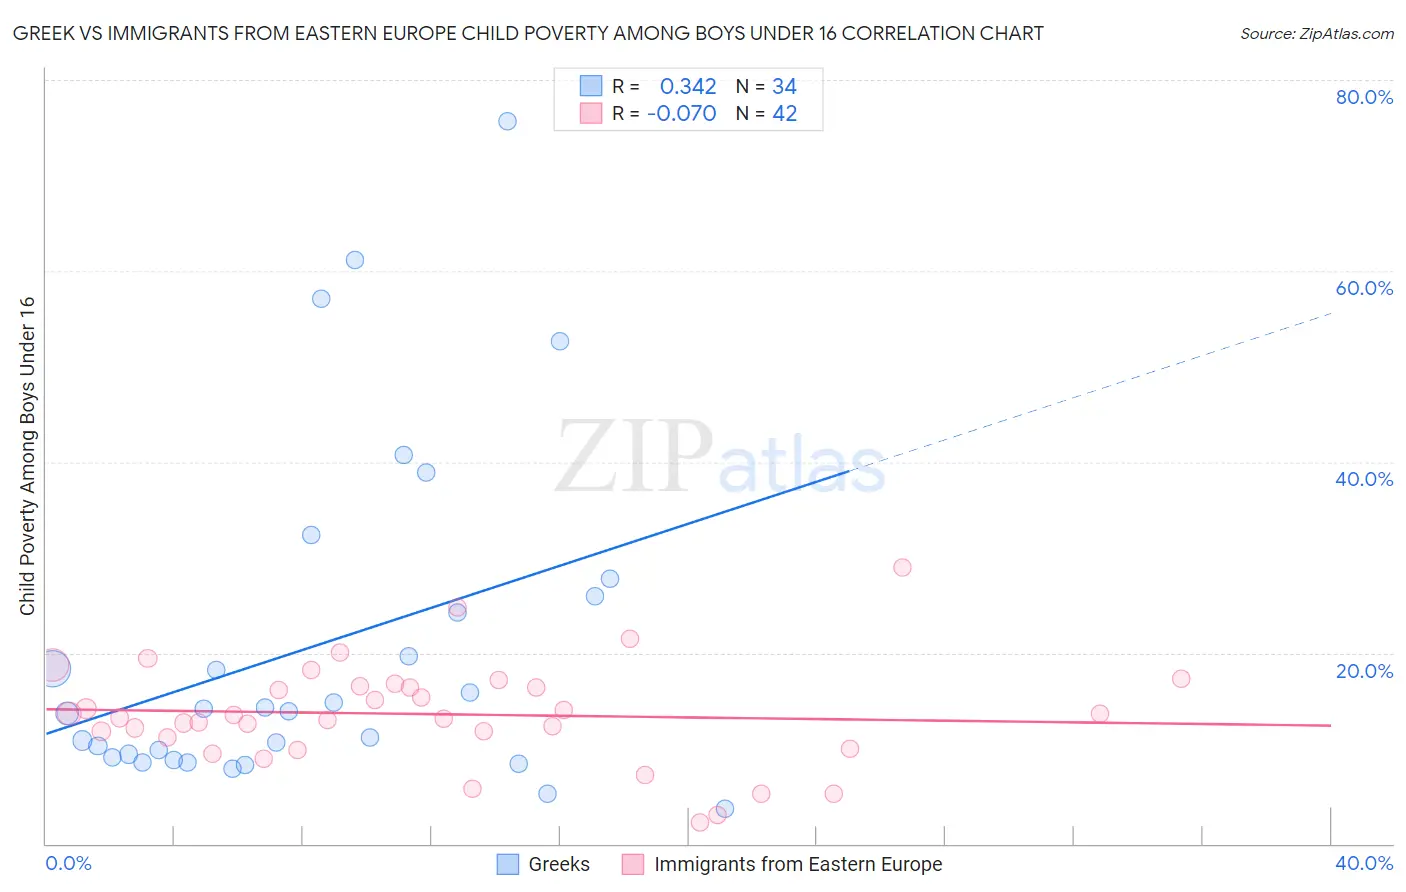 Greek vs Immigrants from Eastern Europe Child Poverty Among Boys Under 16